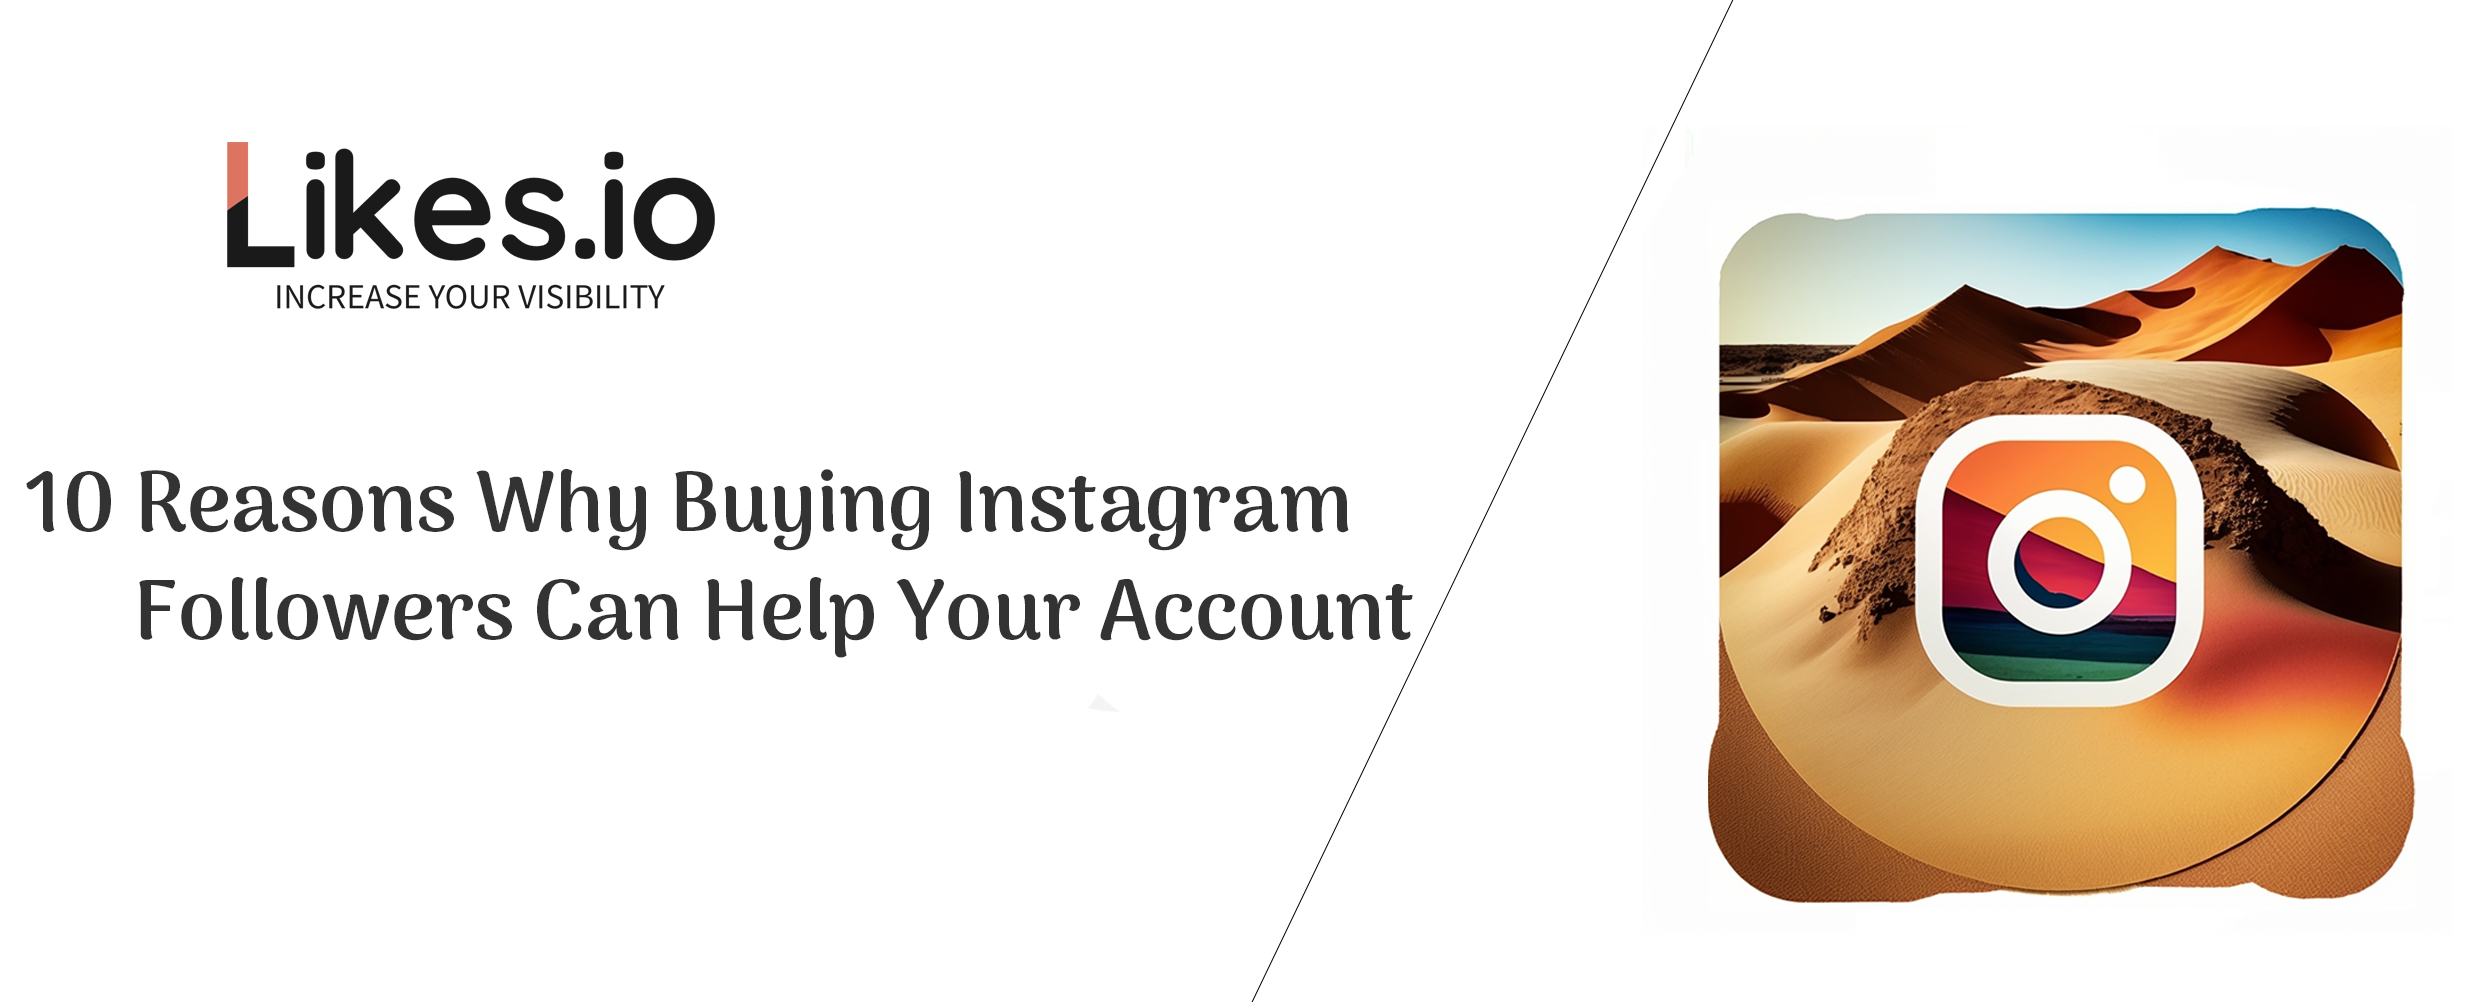 Why Buying Instagram Followers Can Help Your Account